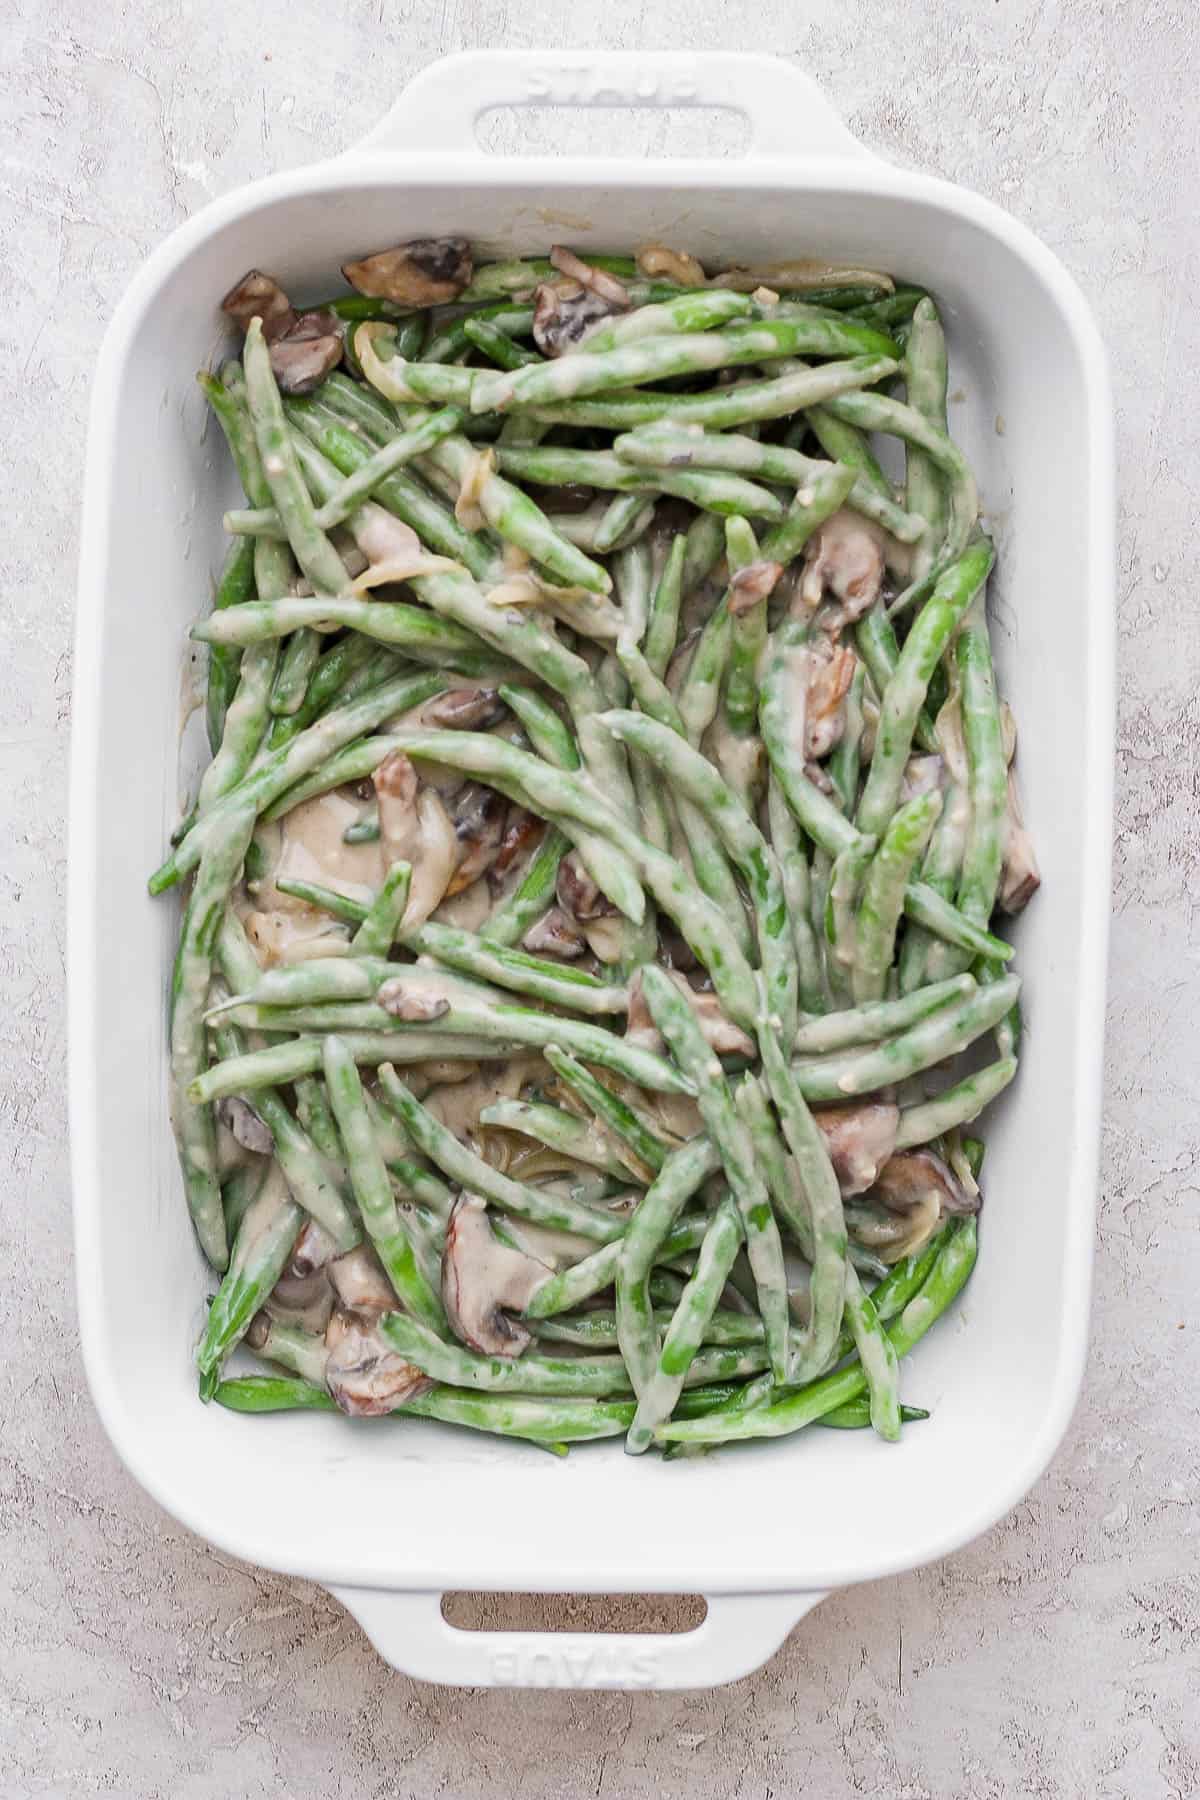 A fully combined green bean casserole before baking.